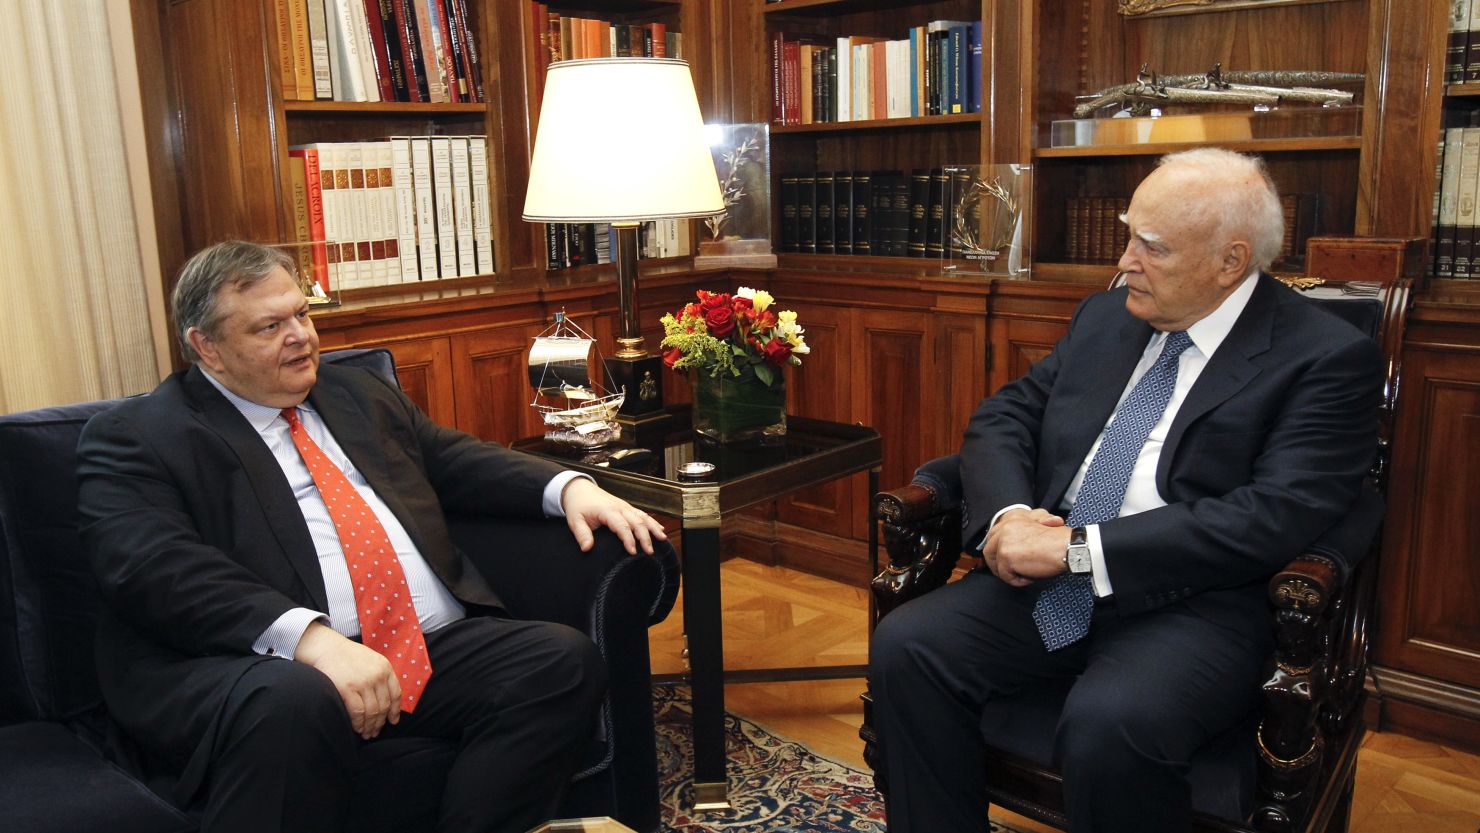 Greek President Karolos Papoulias (right) pictured with Socialist PASOK party leader Evangelos Venizelos on Thursday.